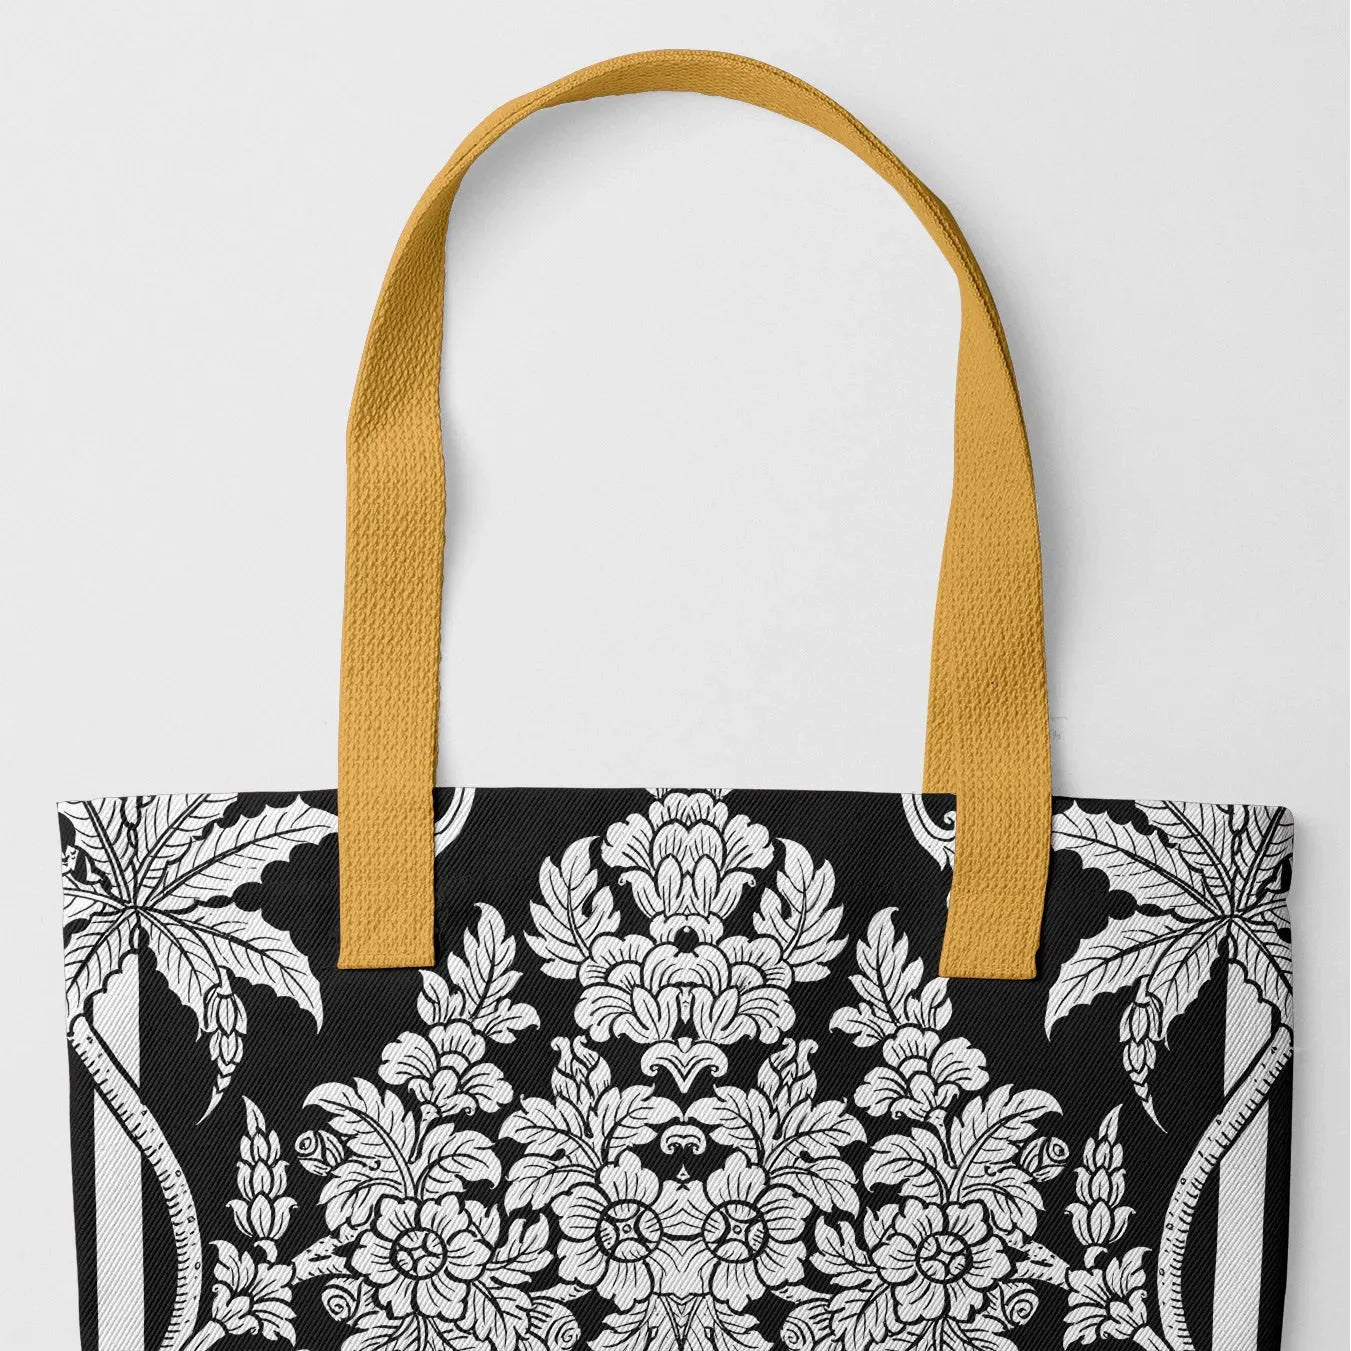 Midnight Oasis Tote Bag-black And White - Heavy Duty Reusable Grocery Bag - Yellow Handles - Shopping Totes - Aesthetic